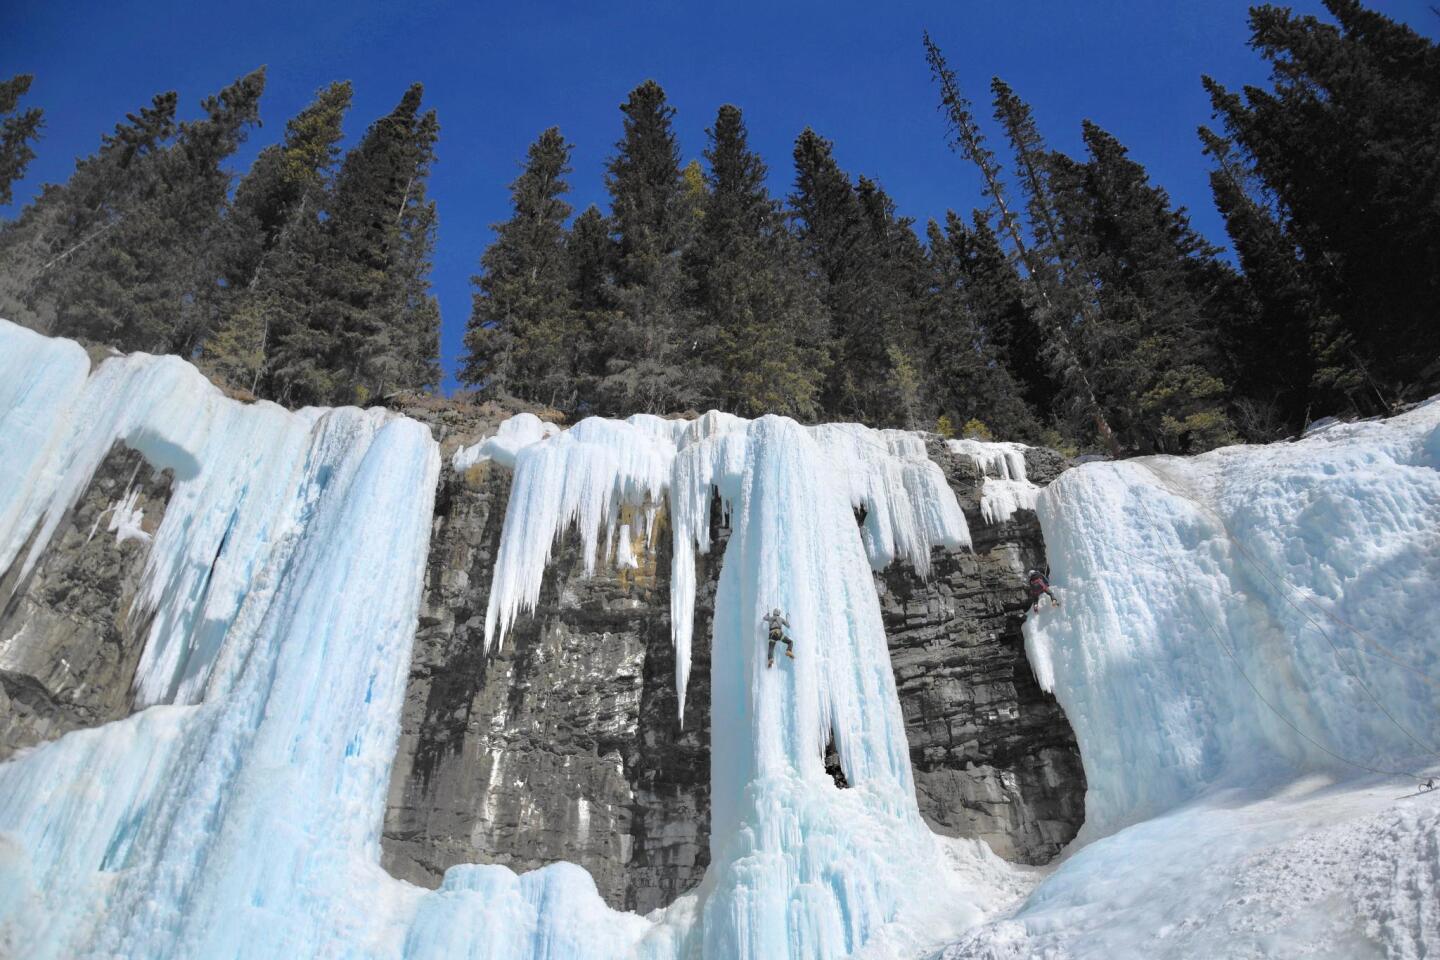 Johnston Canyon offers several routes for climbers of all levels.